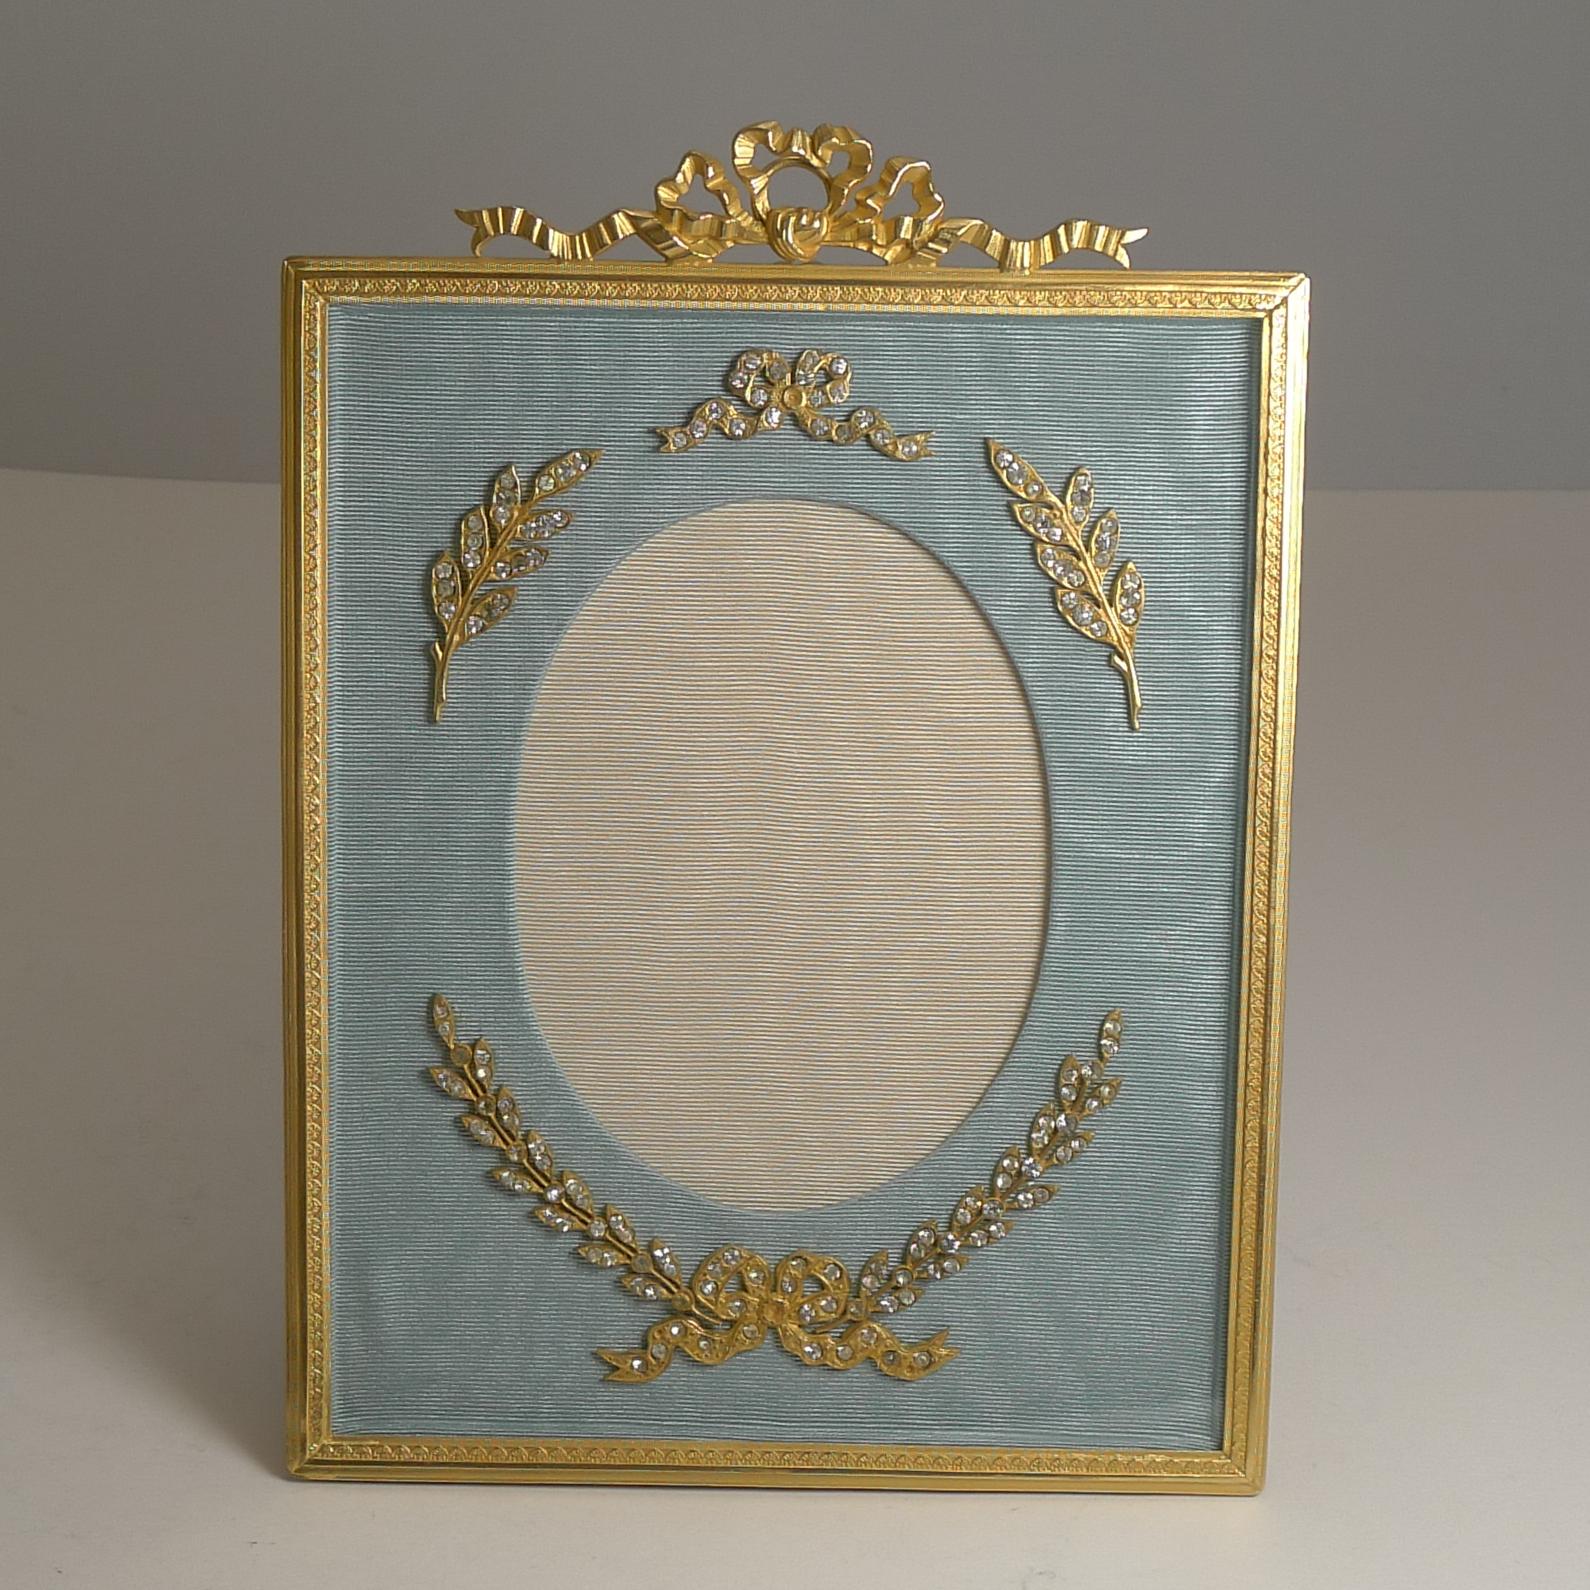 A stunning antique French gilded bronze / Ormolu picture frame beautifully restored to it's former glory.

The top is crowned with a ribbon and bow mount and behind the glass are stunning bronze mounts set with period paste stones sitting on an eau